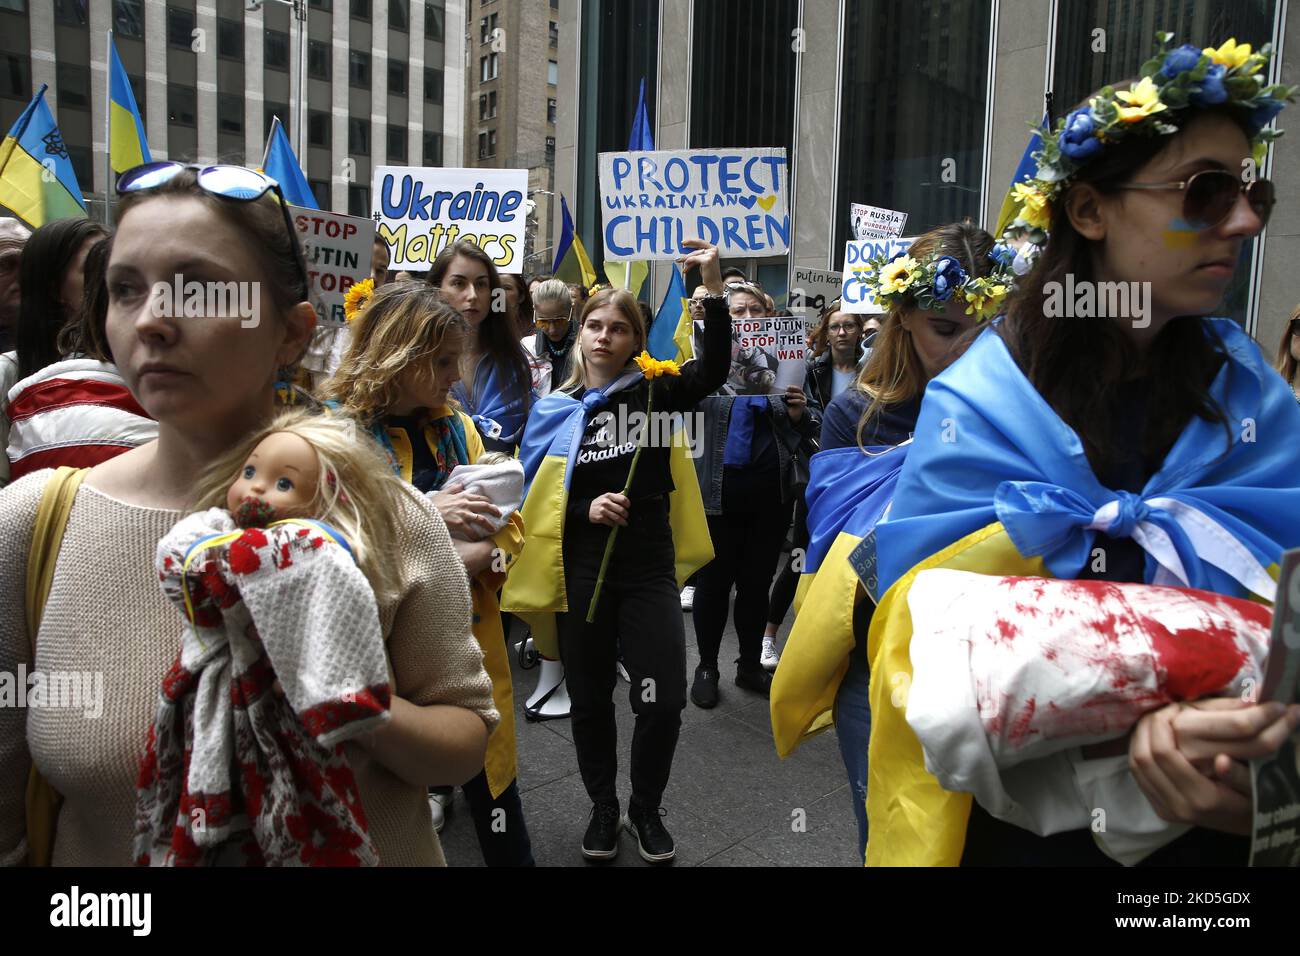 Ukrainian supporters chant slogans holding signs and flags during a rally in front of the FOX News building on March 19-2022 in New York City USA. As the Russian invasion of Ukraine escalates with intense shelling and targeting of civilians, demonstrators demand a no-fly zone over the country. (Photo by John Lamparski/NurPhoto) Stock Photo